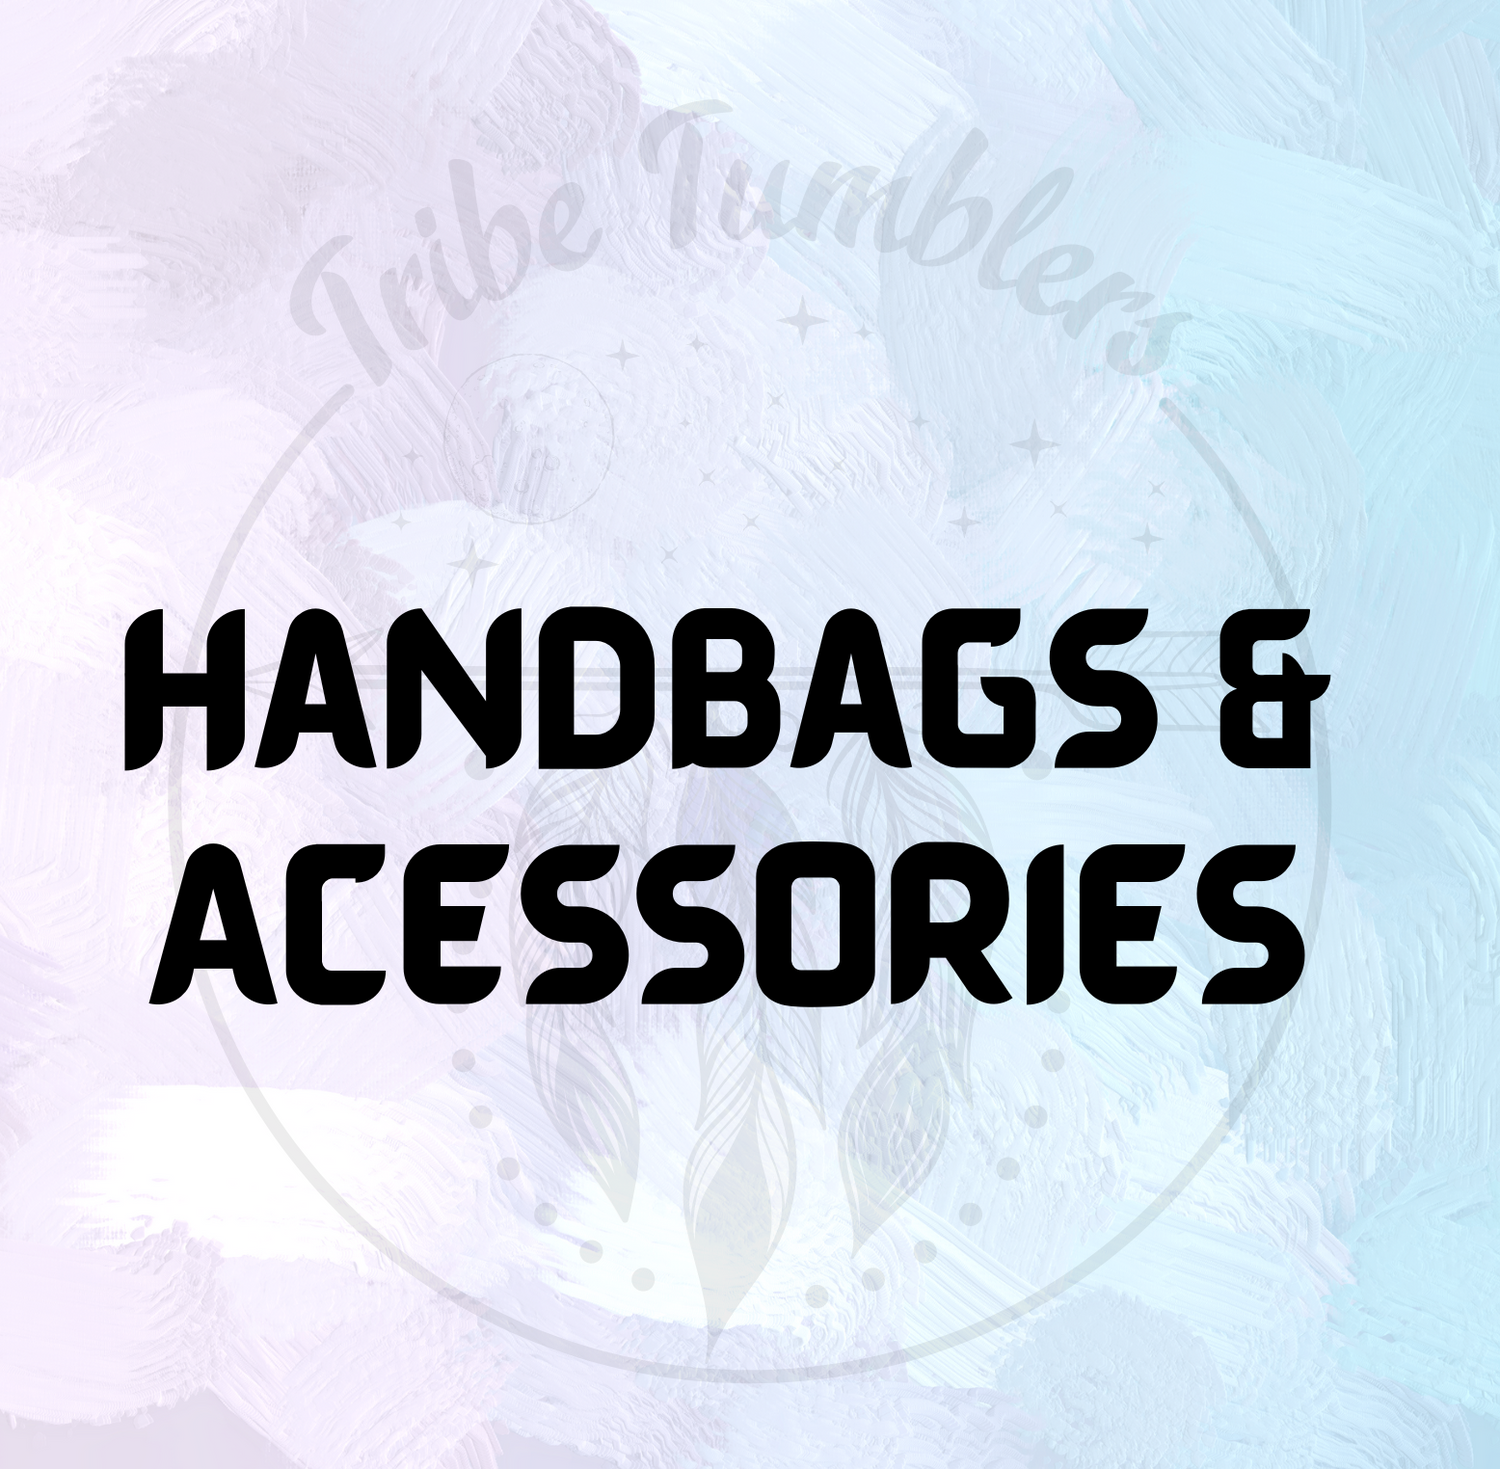 HANDBAGS AND ACCESSORIES